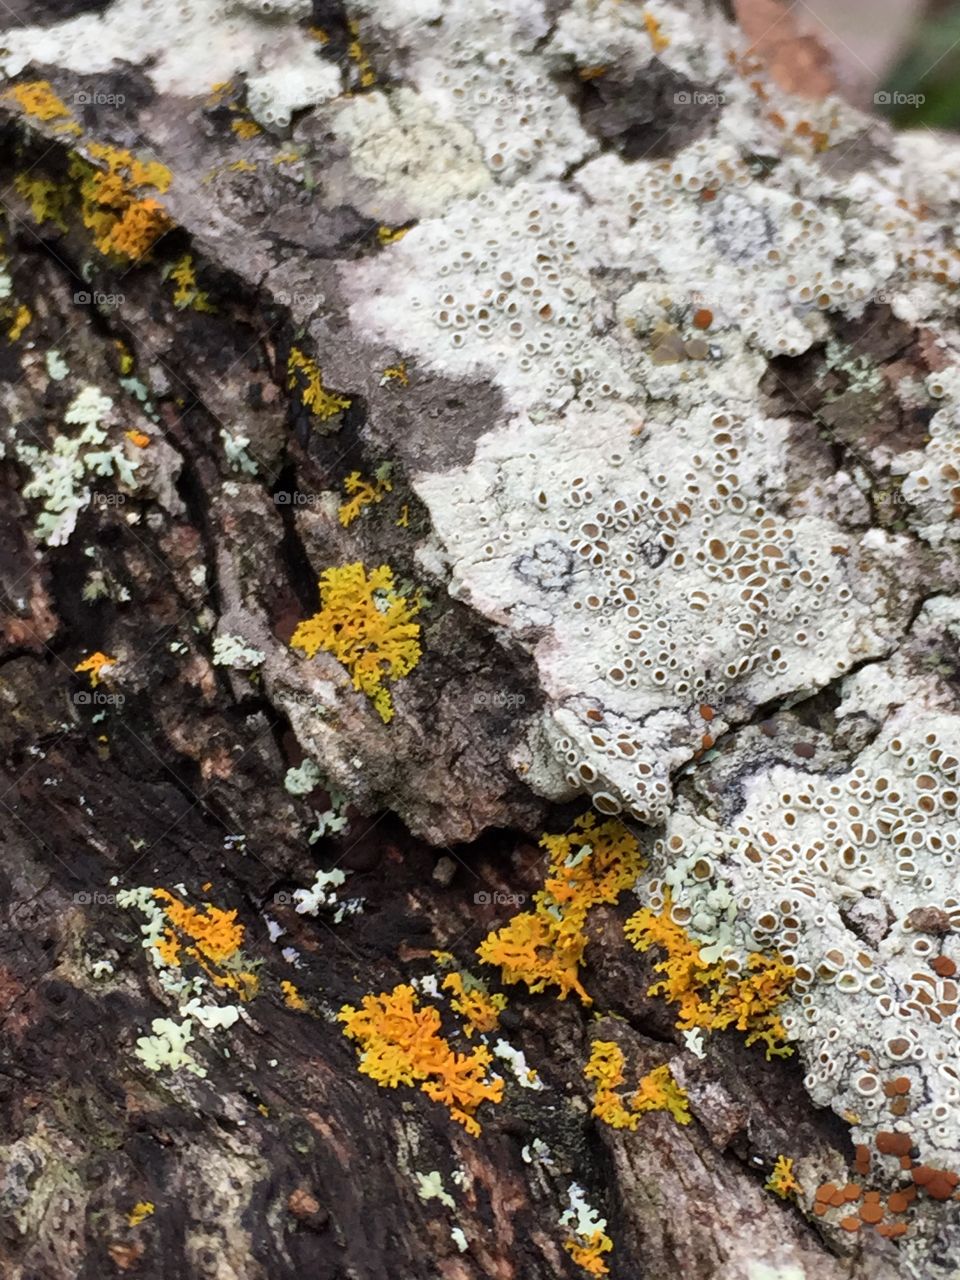 Lichens on a fallen log. I loved the colors!!